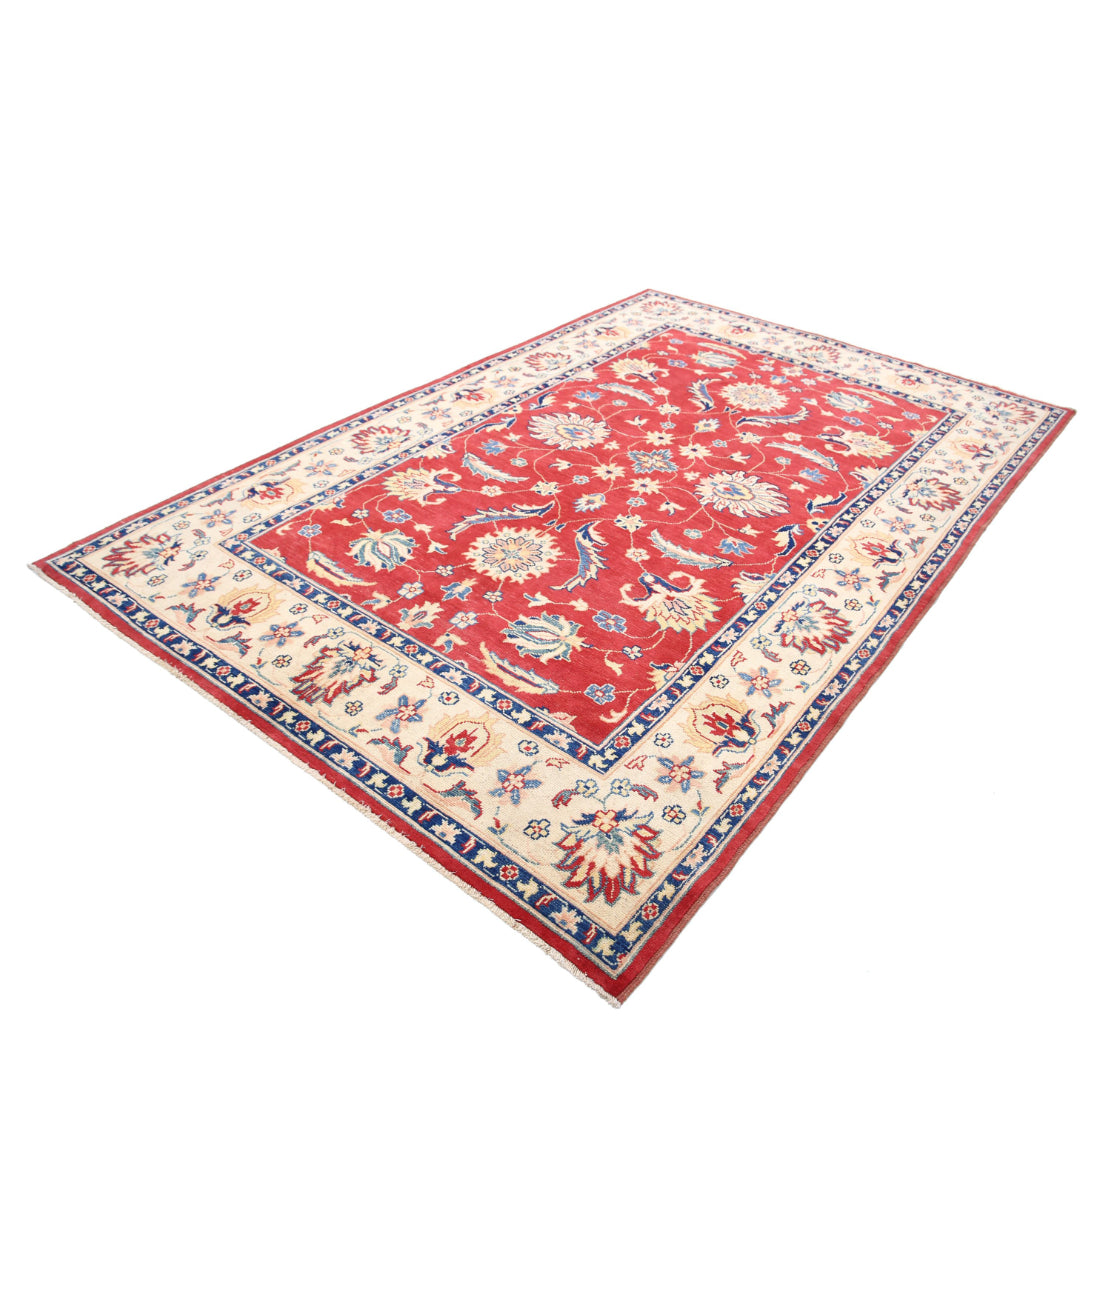 Ziegler 6'7'' X 9'11'' Hand-Knotted Wool Rug 6'7'' x 9'11'' (198 X 298) / Red / N/A